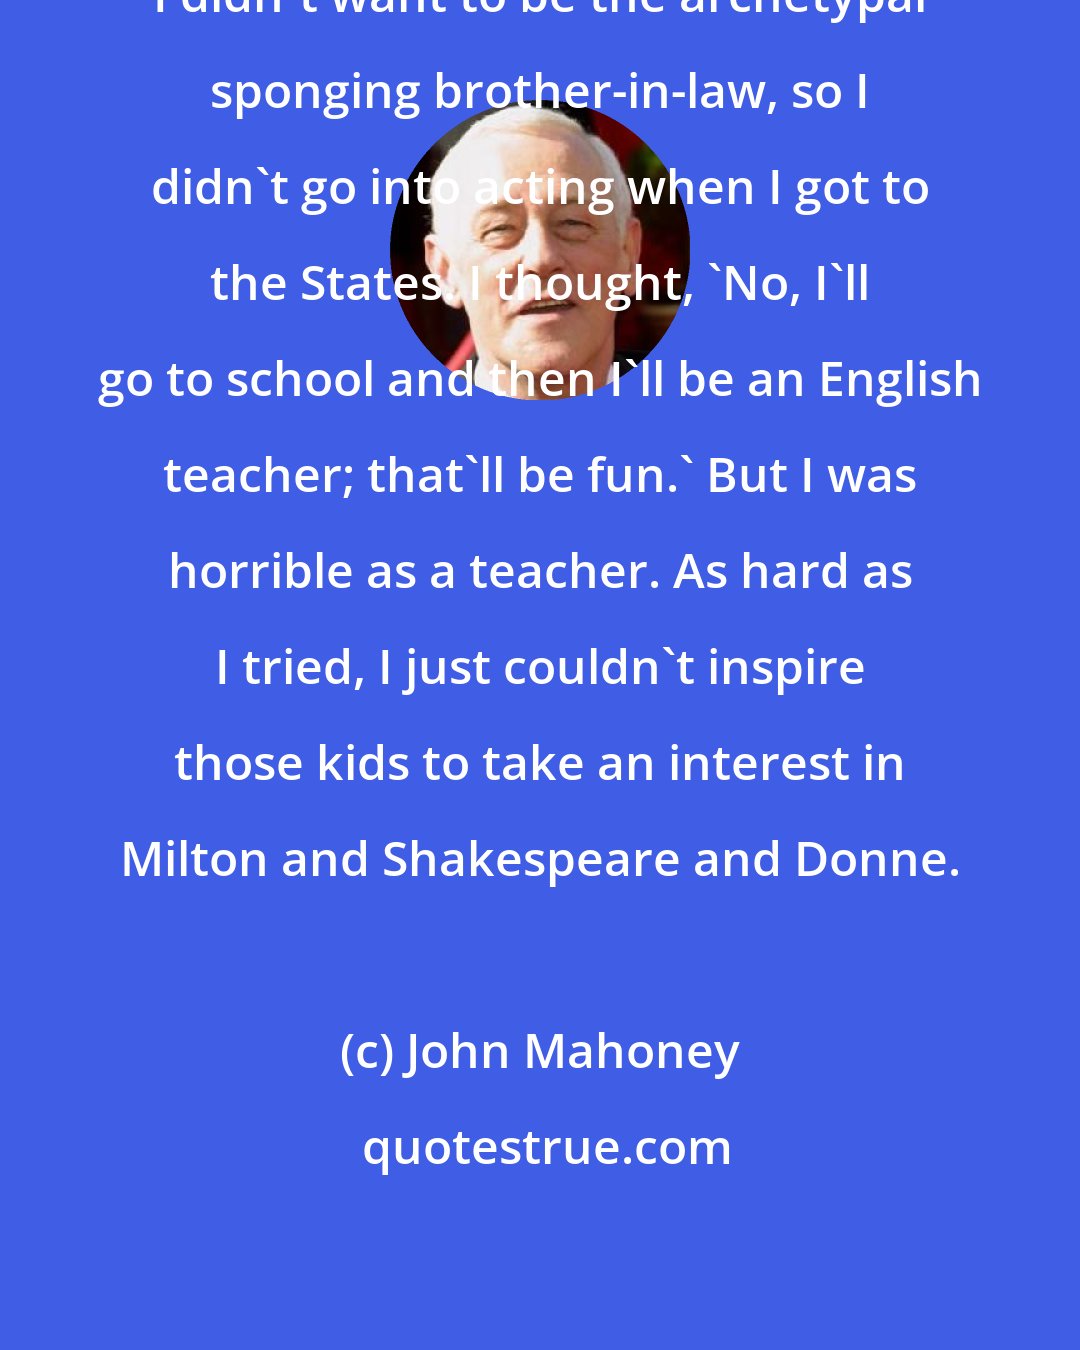 John Mahoney: I didn't want to be the archetypal sponging brother-in-law, so I didn't go into acting when I got to the States. I thought, 'No, I'll go to school and then I'll be an English teacher; that'll be fun.' But I was horrible as a teacher. As hard as I tried, I just couldn't inspire those kids to take an interest in Milton and Shakespeare and Donne.